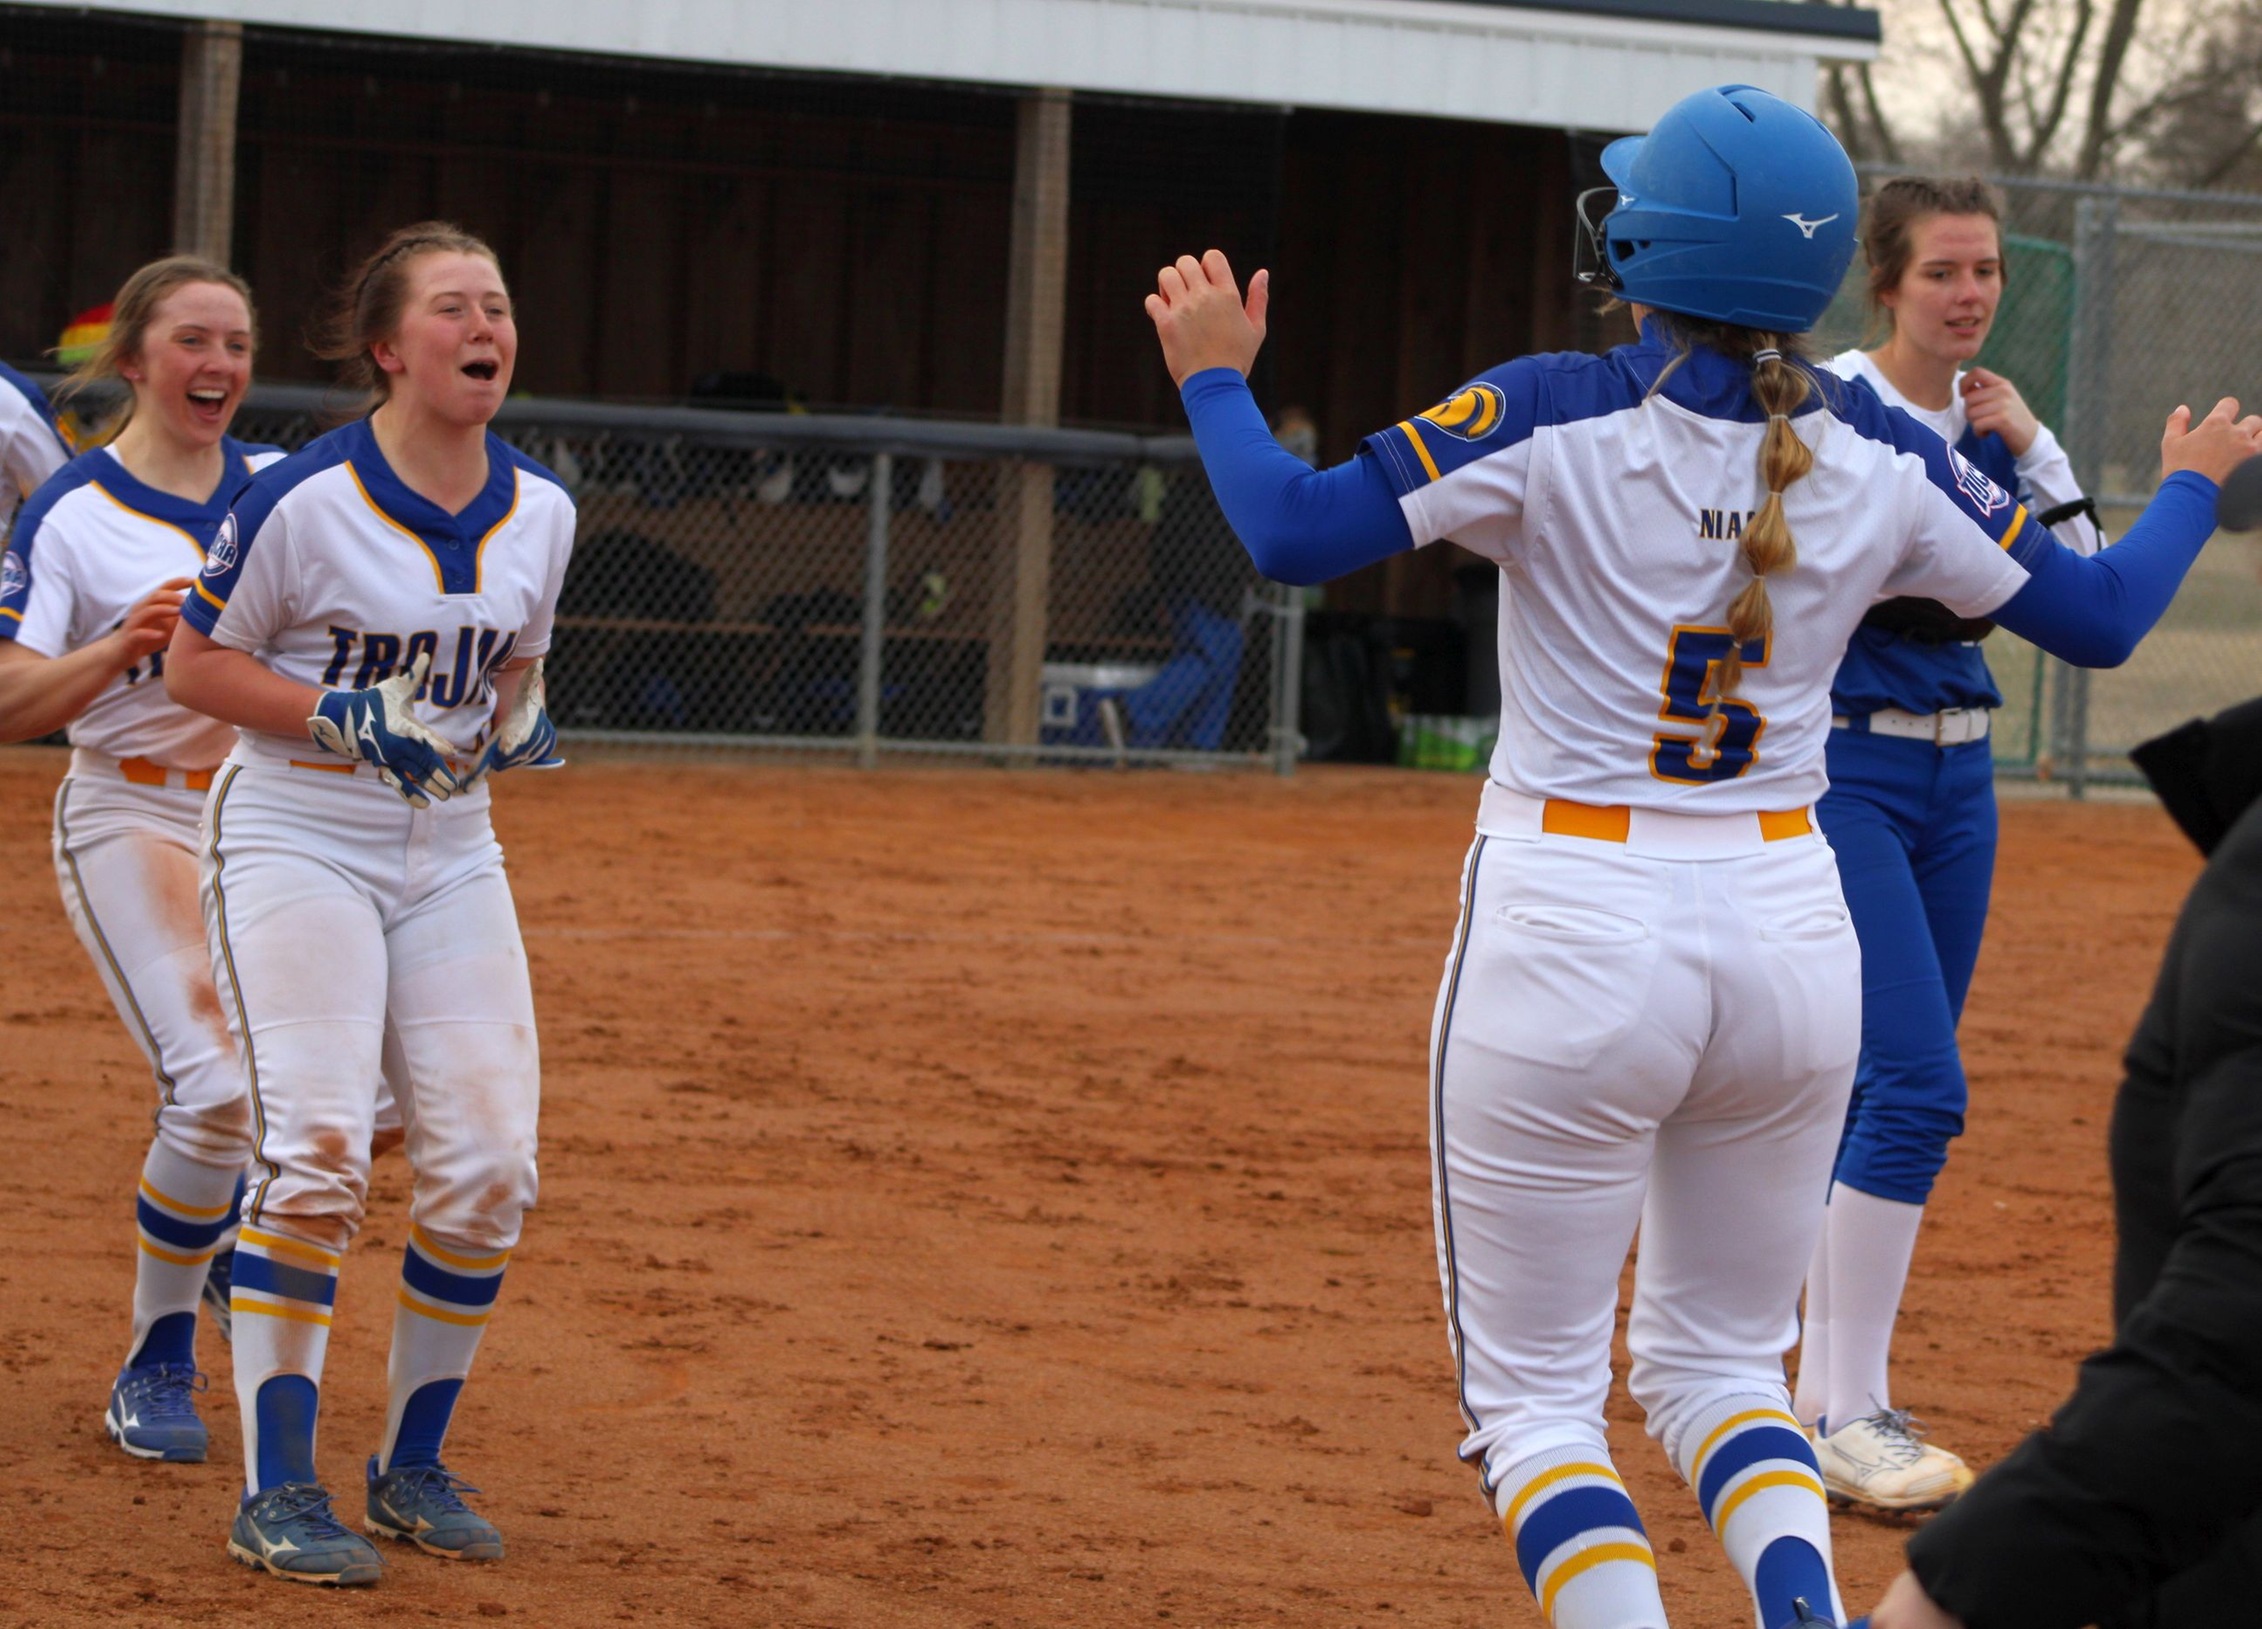 NIACC celebrates its 6-5 win over No. 3 DMACC in second game of doubleheader on Friday in Boone.